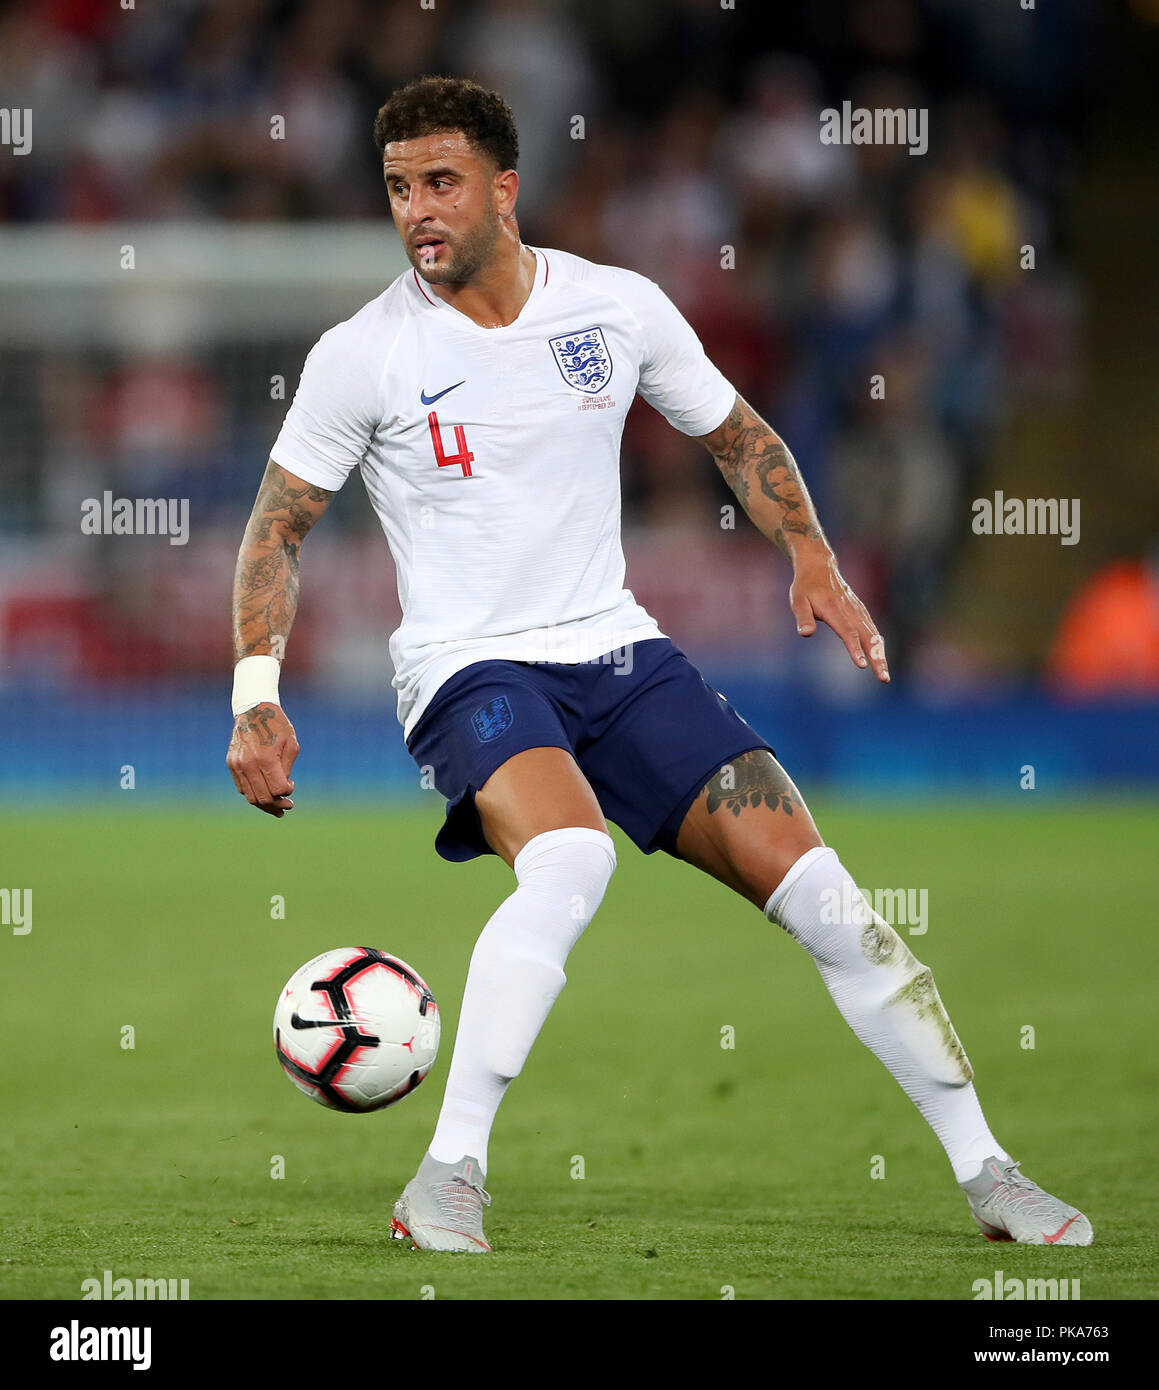 England's Kyle Walker during the International Friendly at The King Power Stadium, Leicester. PRESS ASSOCIATION Photo. Picture date: Tuesday September 11, 2018. See PA story SOCCER England. Photo credit should read: Nick Potts/PA Wire. Stock Photo